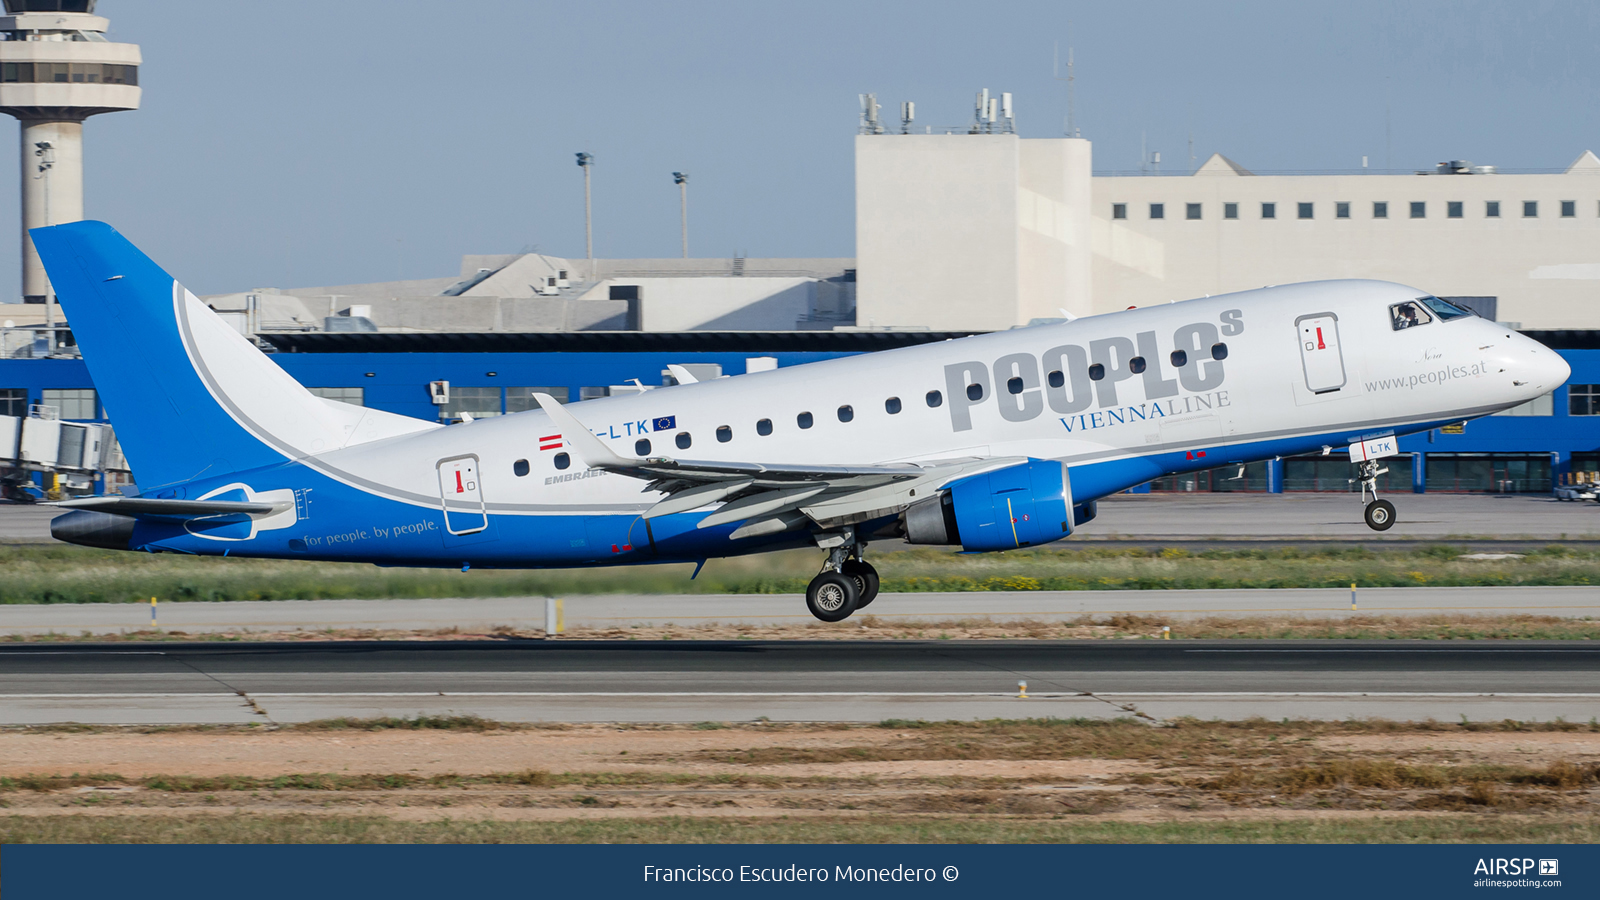 Peoples  Embraer E170  OE-LTK